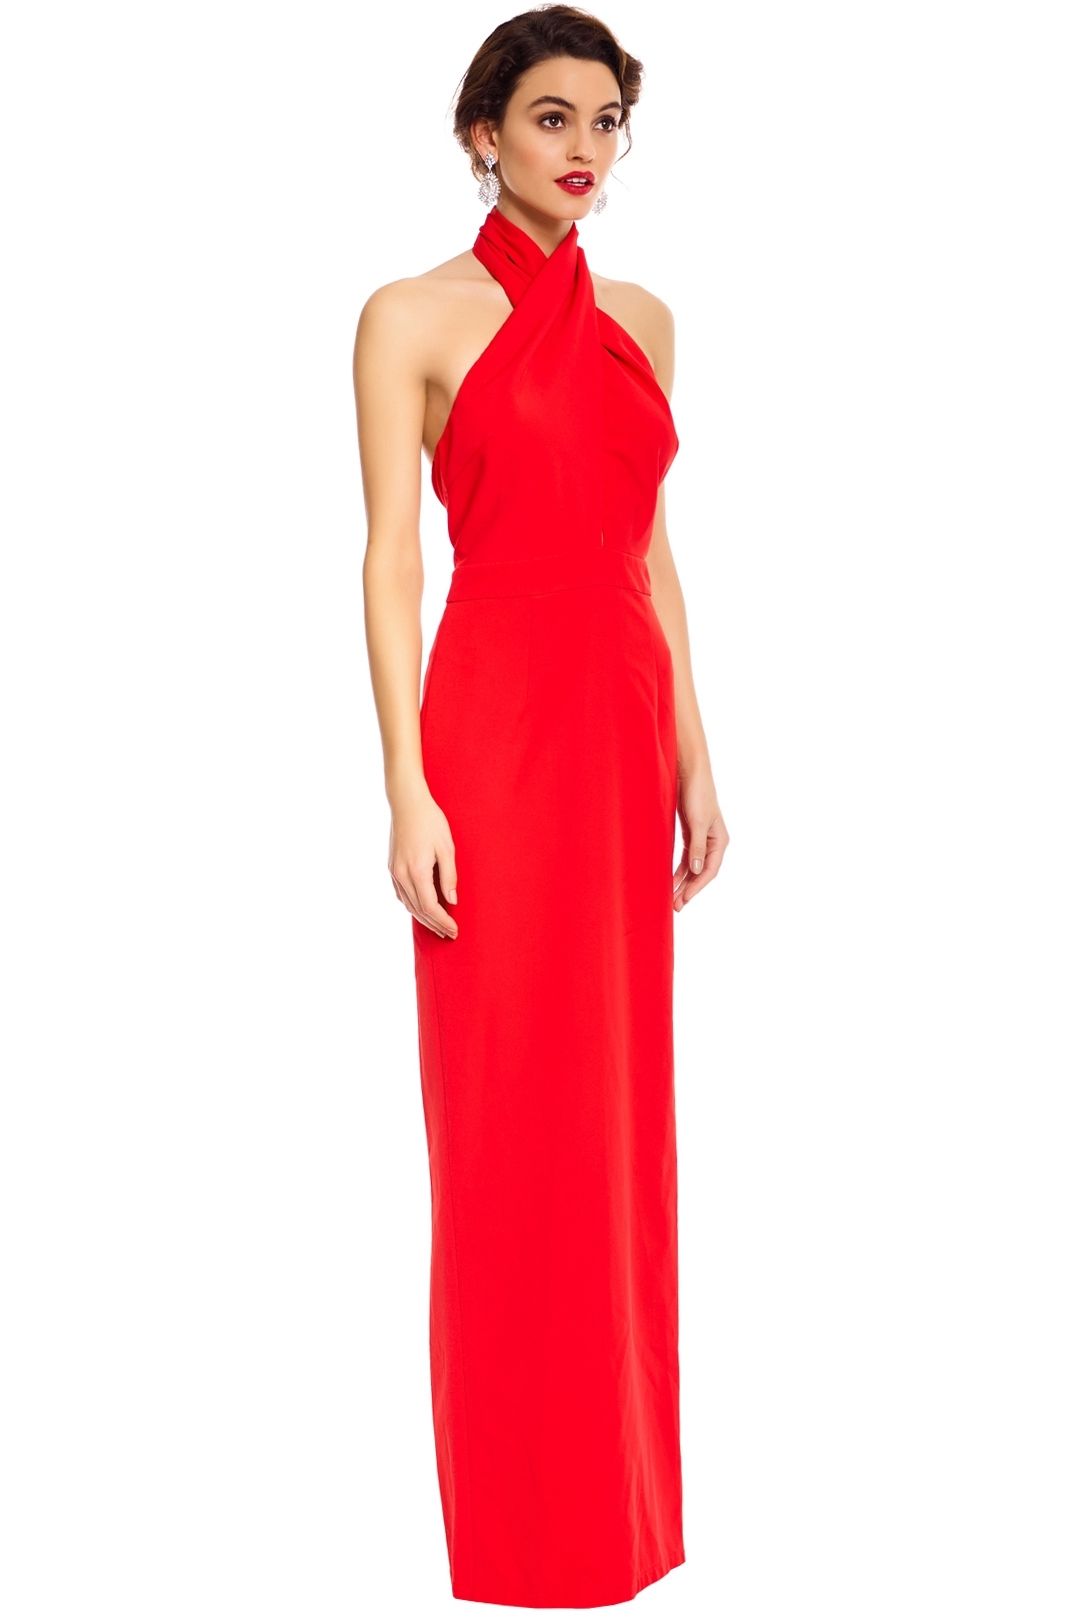 Elle Zeitoune - Winona Red Gown - Red - Side